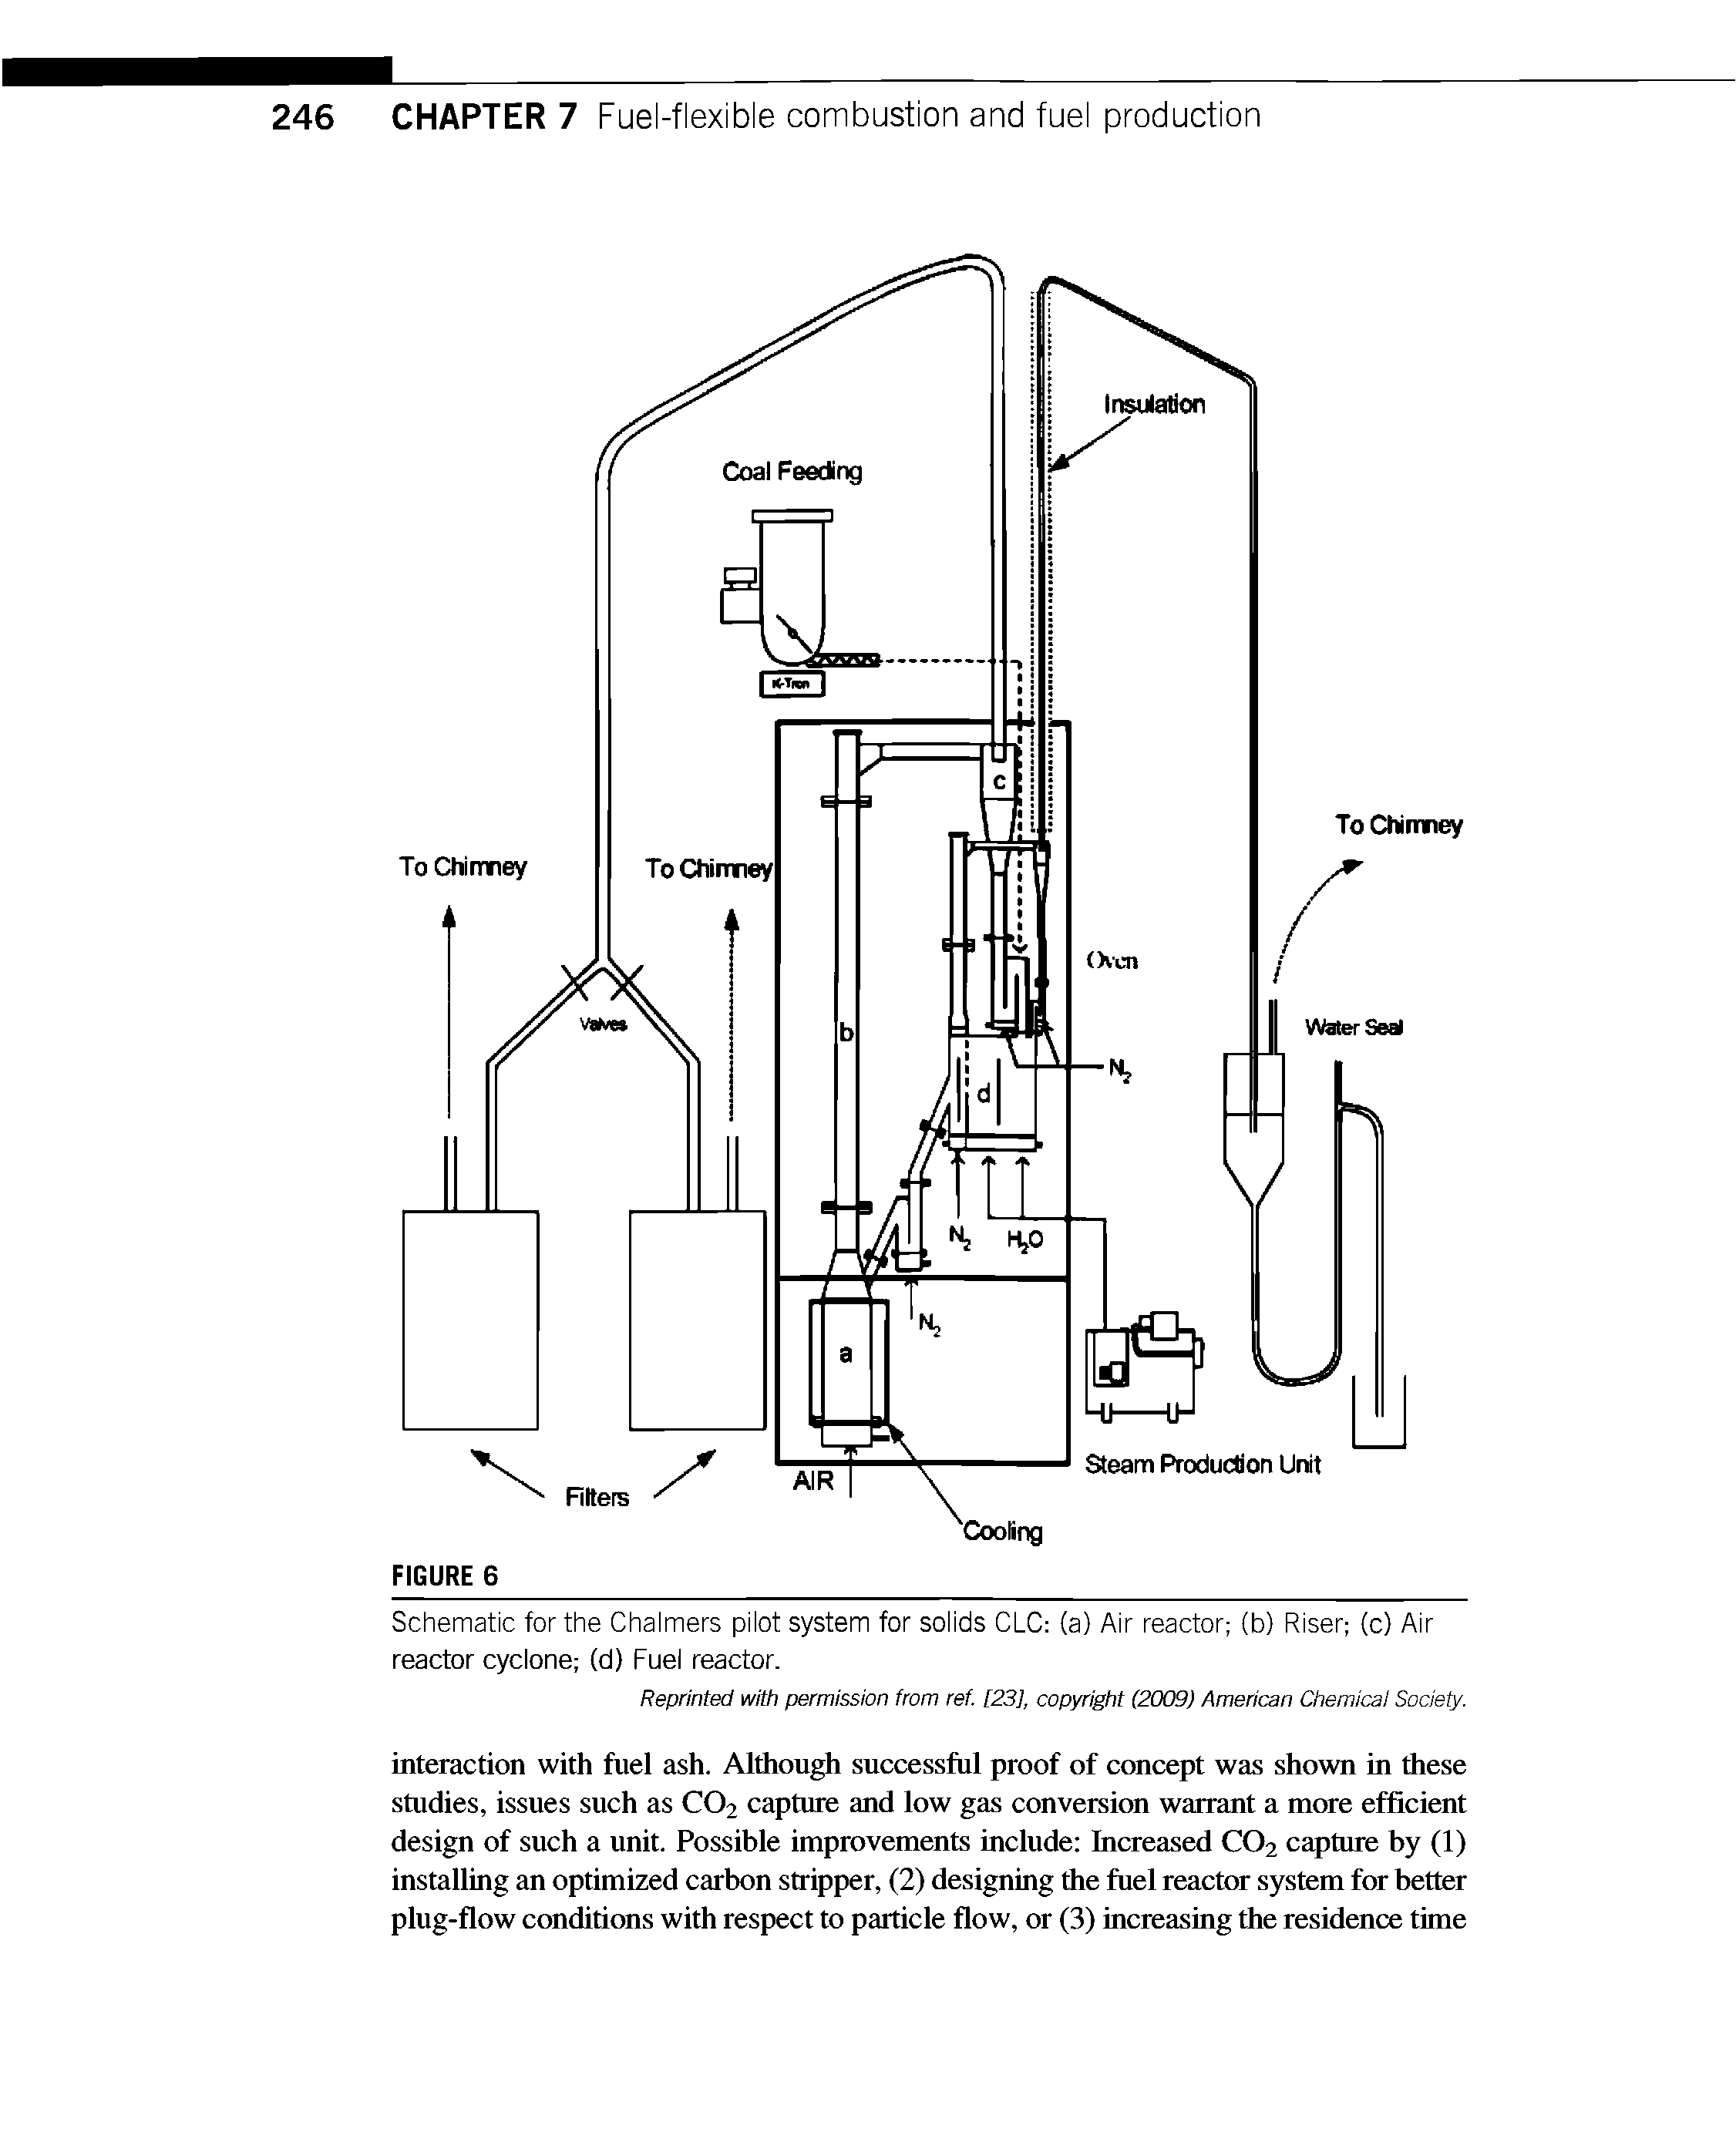 Schematic for the Chalmers pilot system for solids CLC (a) Air reactor (b) Riser (c) Air reactor cyclone (d) Fuel reactor.